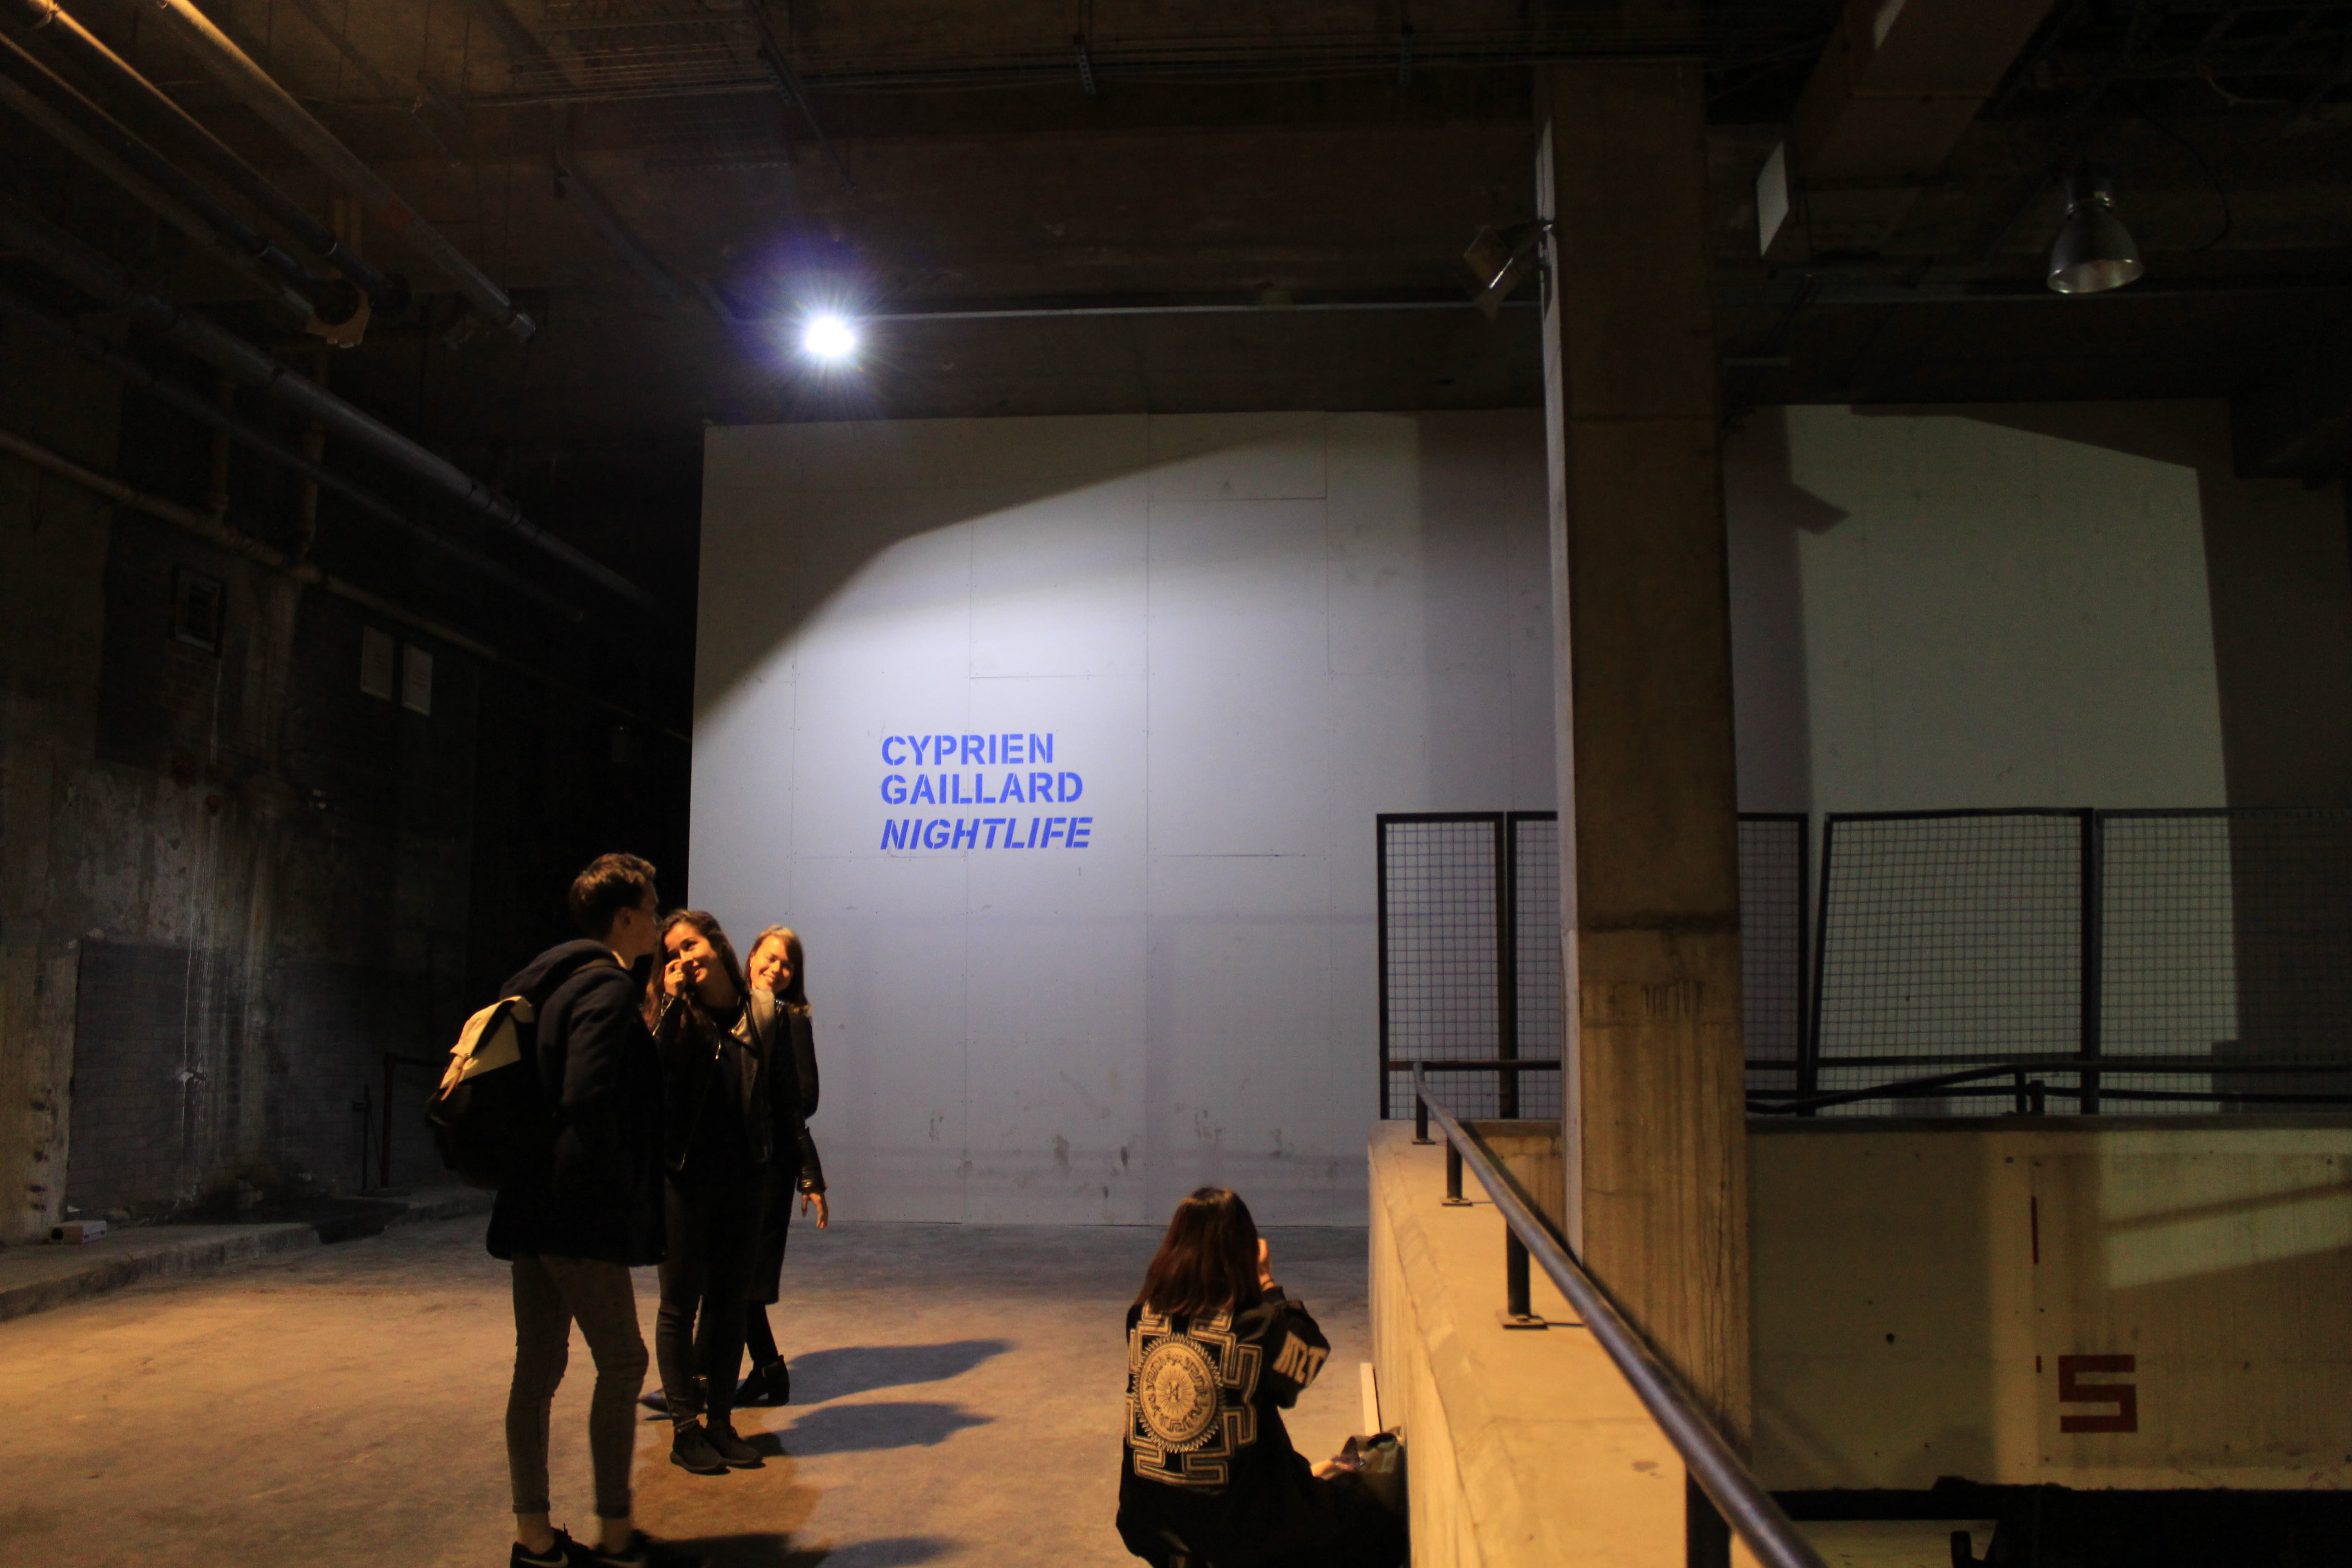 People making their way to Cyprien Gaillard's Nightlife situated in the building's carpark by Chloe Chapman